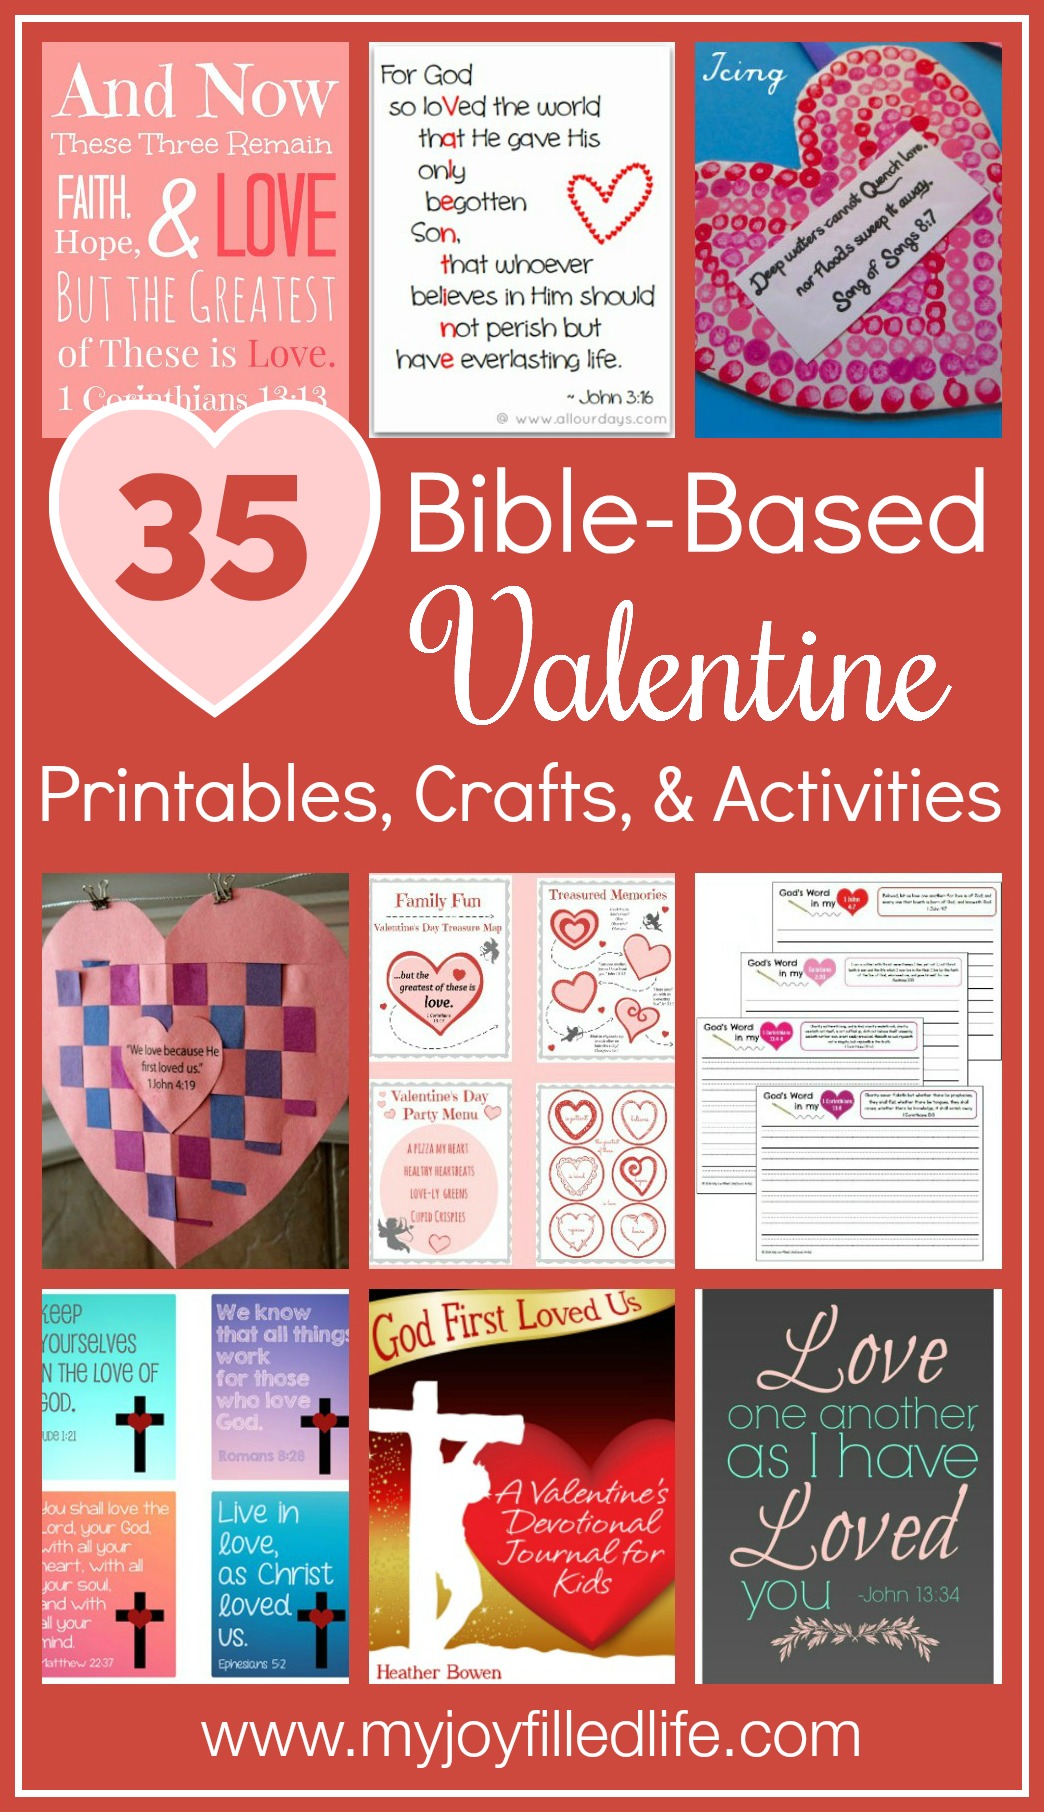 christian-valentines-day-ideas-for-your-family-long-wait-for-isabella